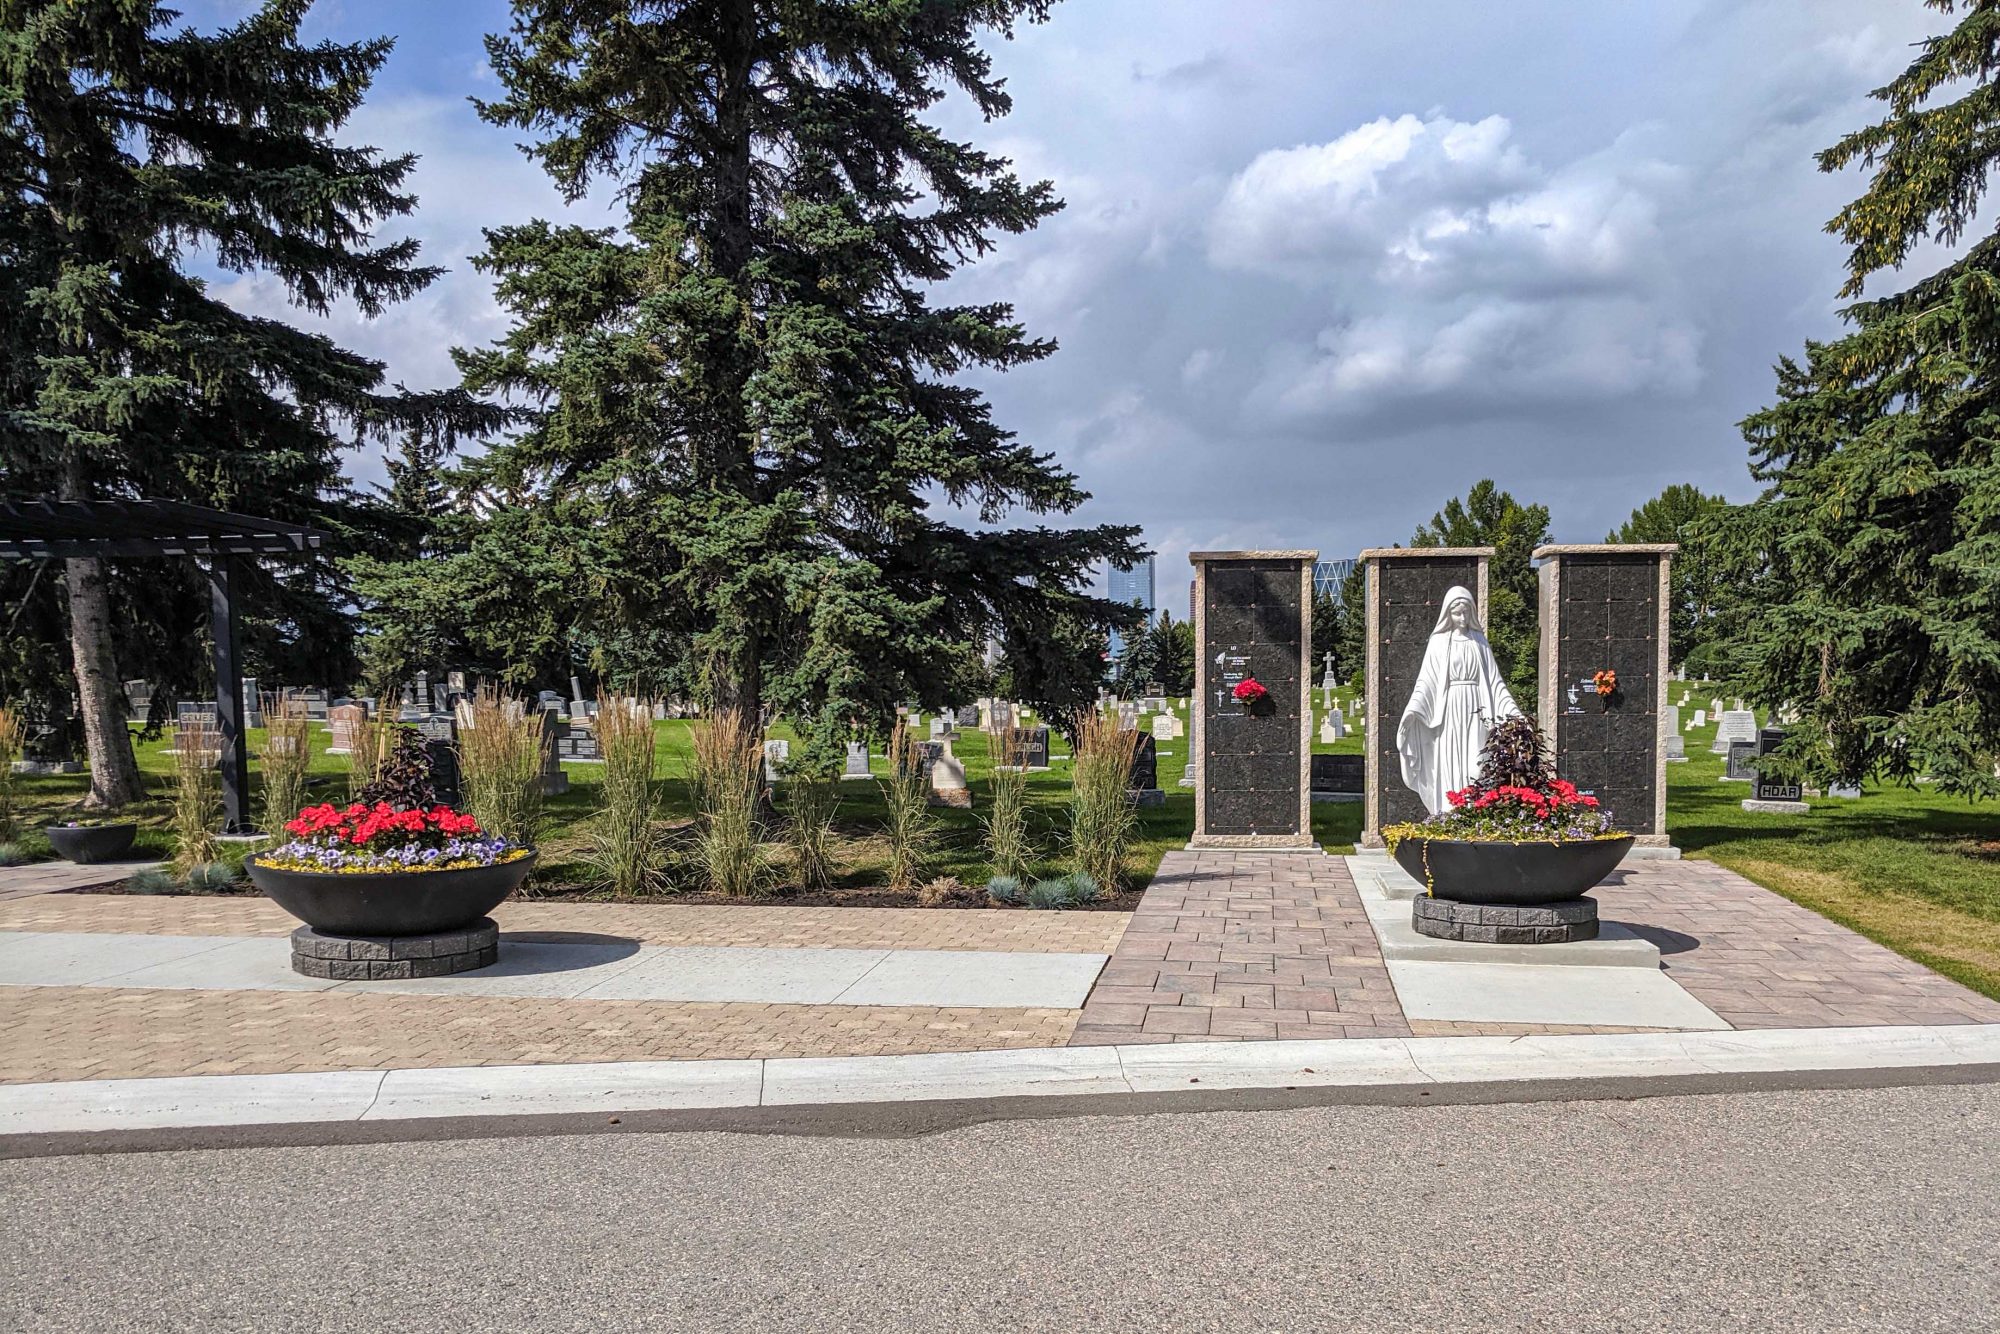 Statue of Mary in the foreground at the entry plaza to a cemetery featuring interlocked stone paving along with plants, flowers and trees. The cemetery and the City of Calgary are in view behind the statue of Mary and the columbaria.